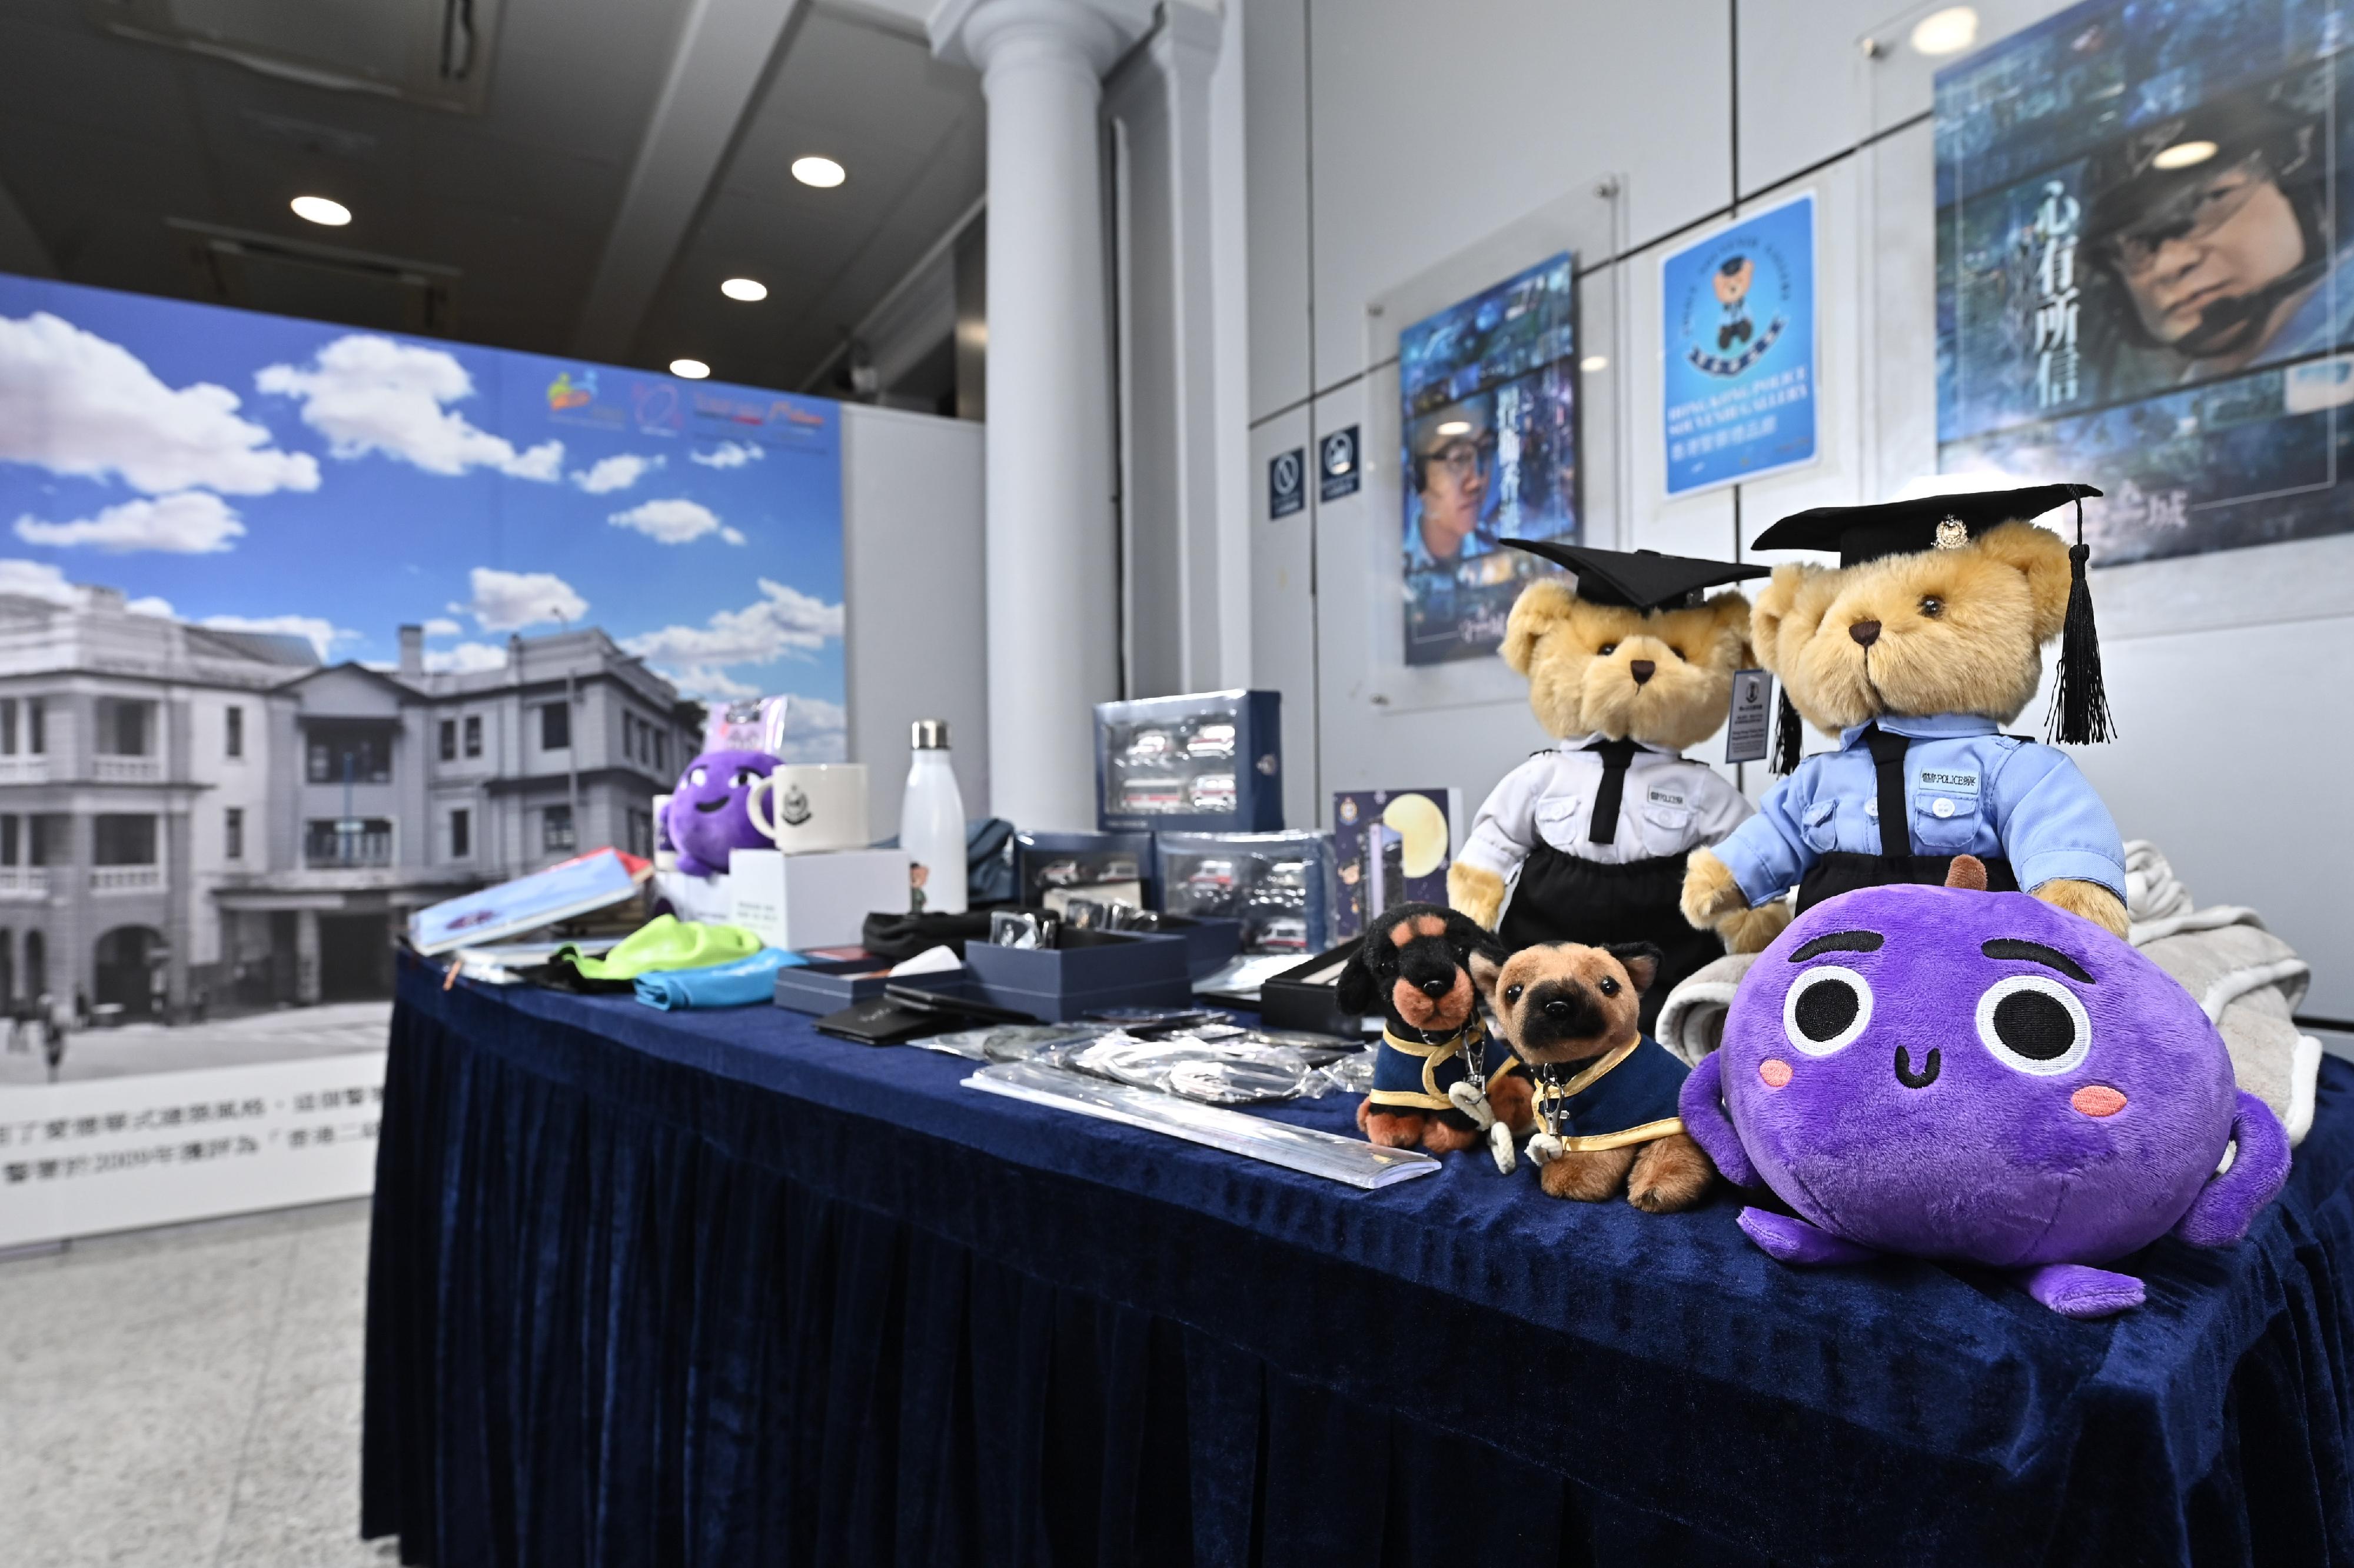 The Police Souvenir Gallery Pop-up Store will be set up at the old Yau Ma Tei Police Station every Saturday from tomorrow (December 9), to strengthen ties with the public and tourists through a variety of souvenirs featuring the Hong Kong Police Force.